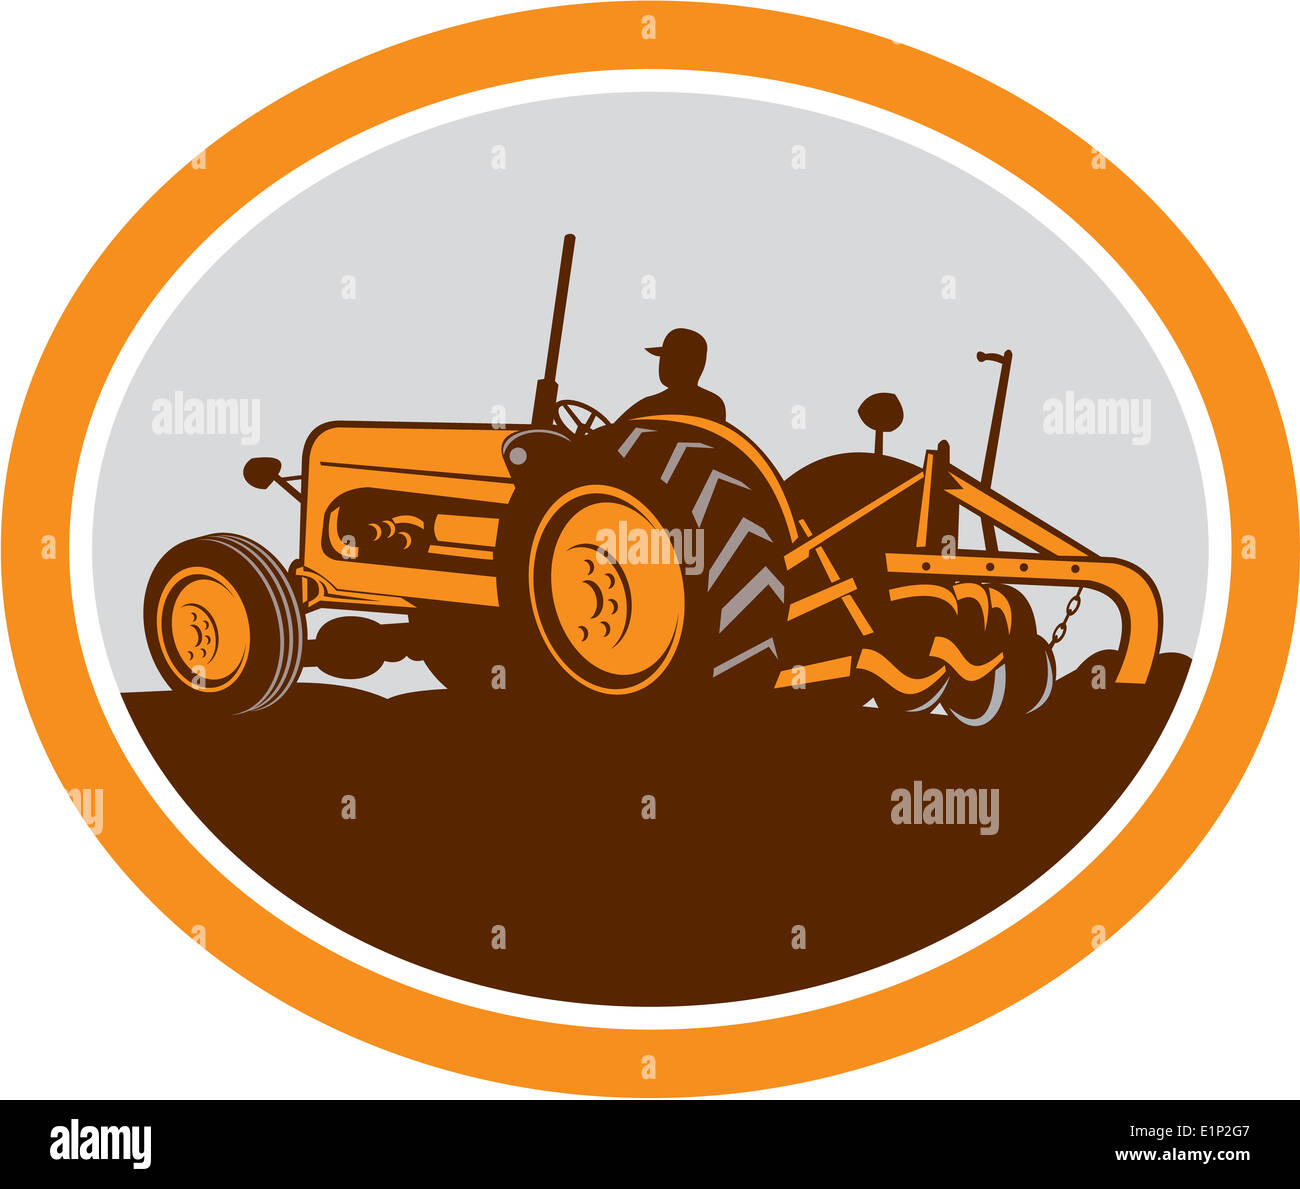 Illustration of a vintage tractor with farmer driver plowing field sideview set inside an oval done in retro style on isolated background. Stock Photo